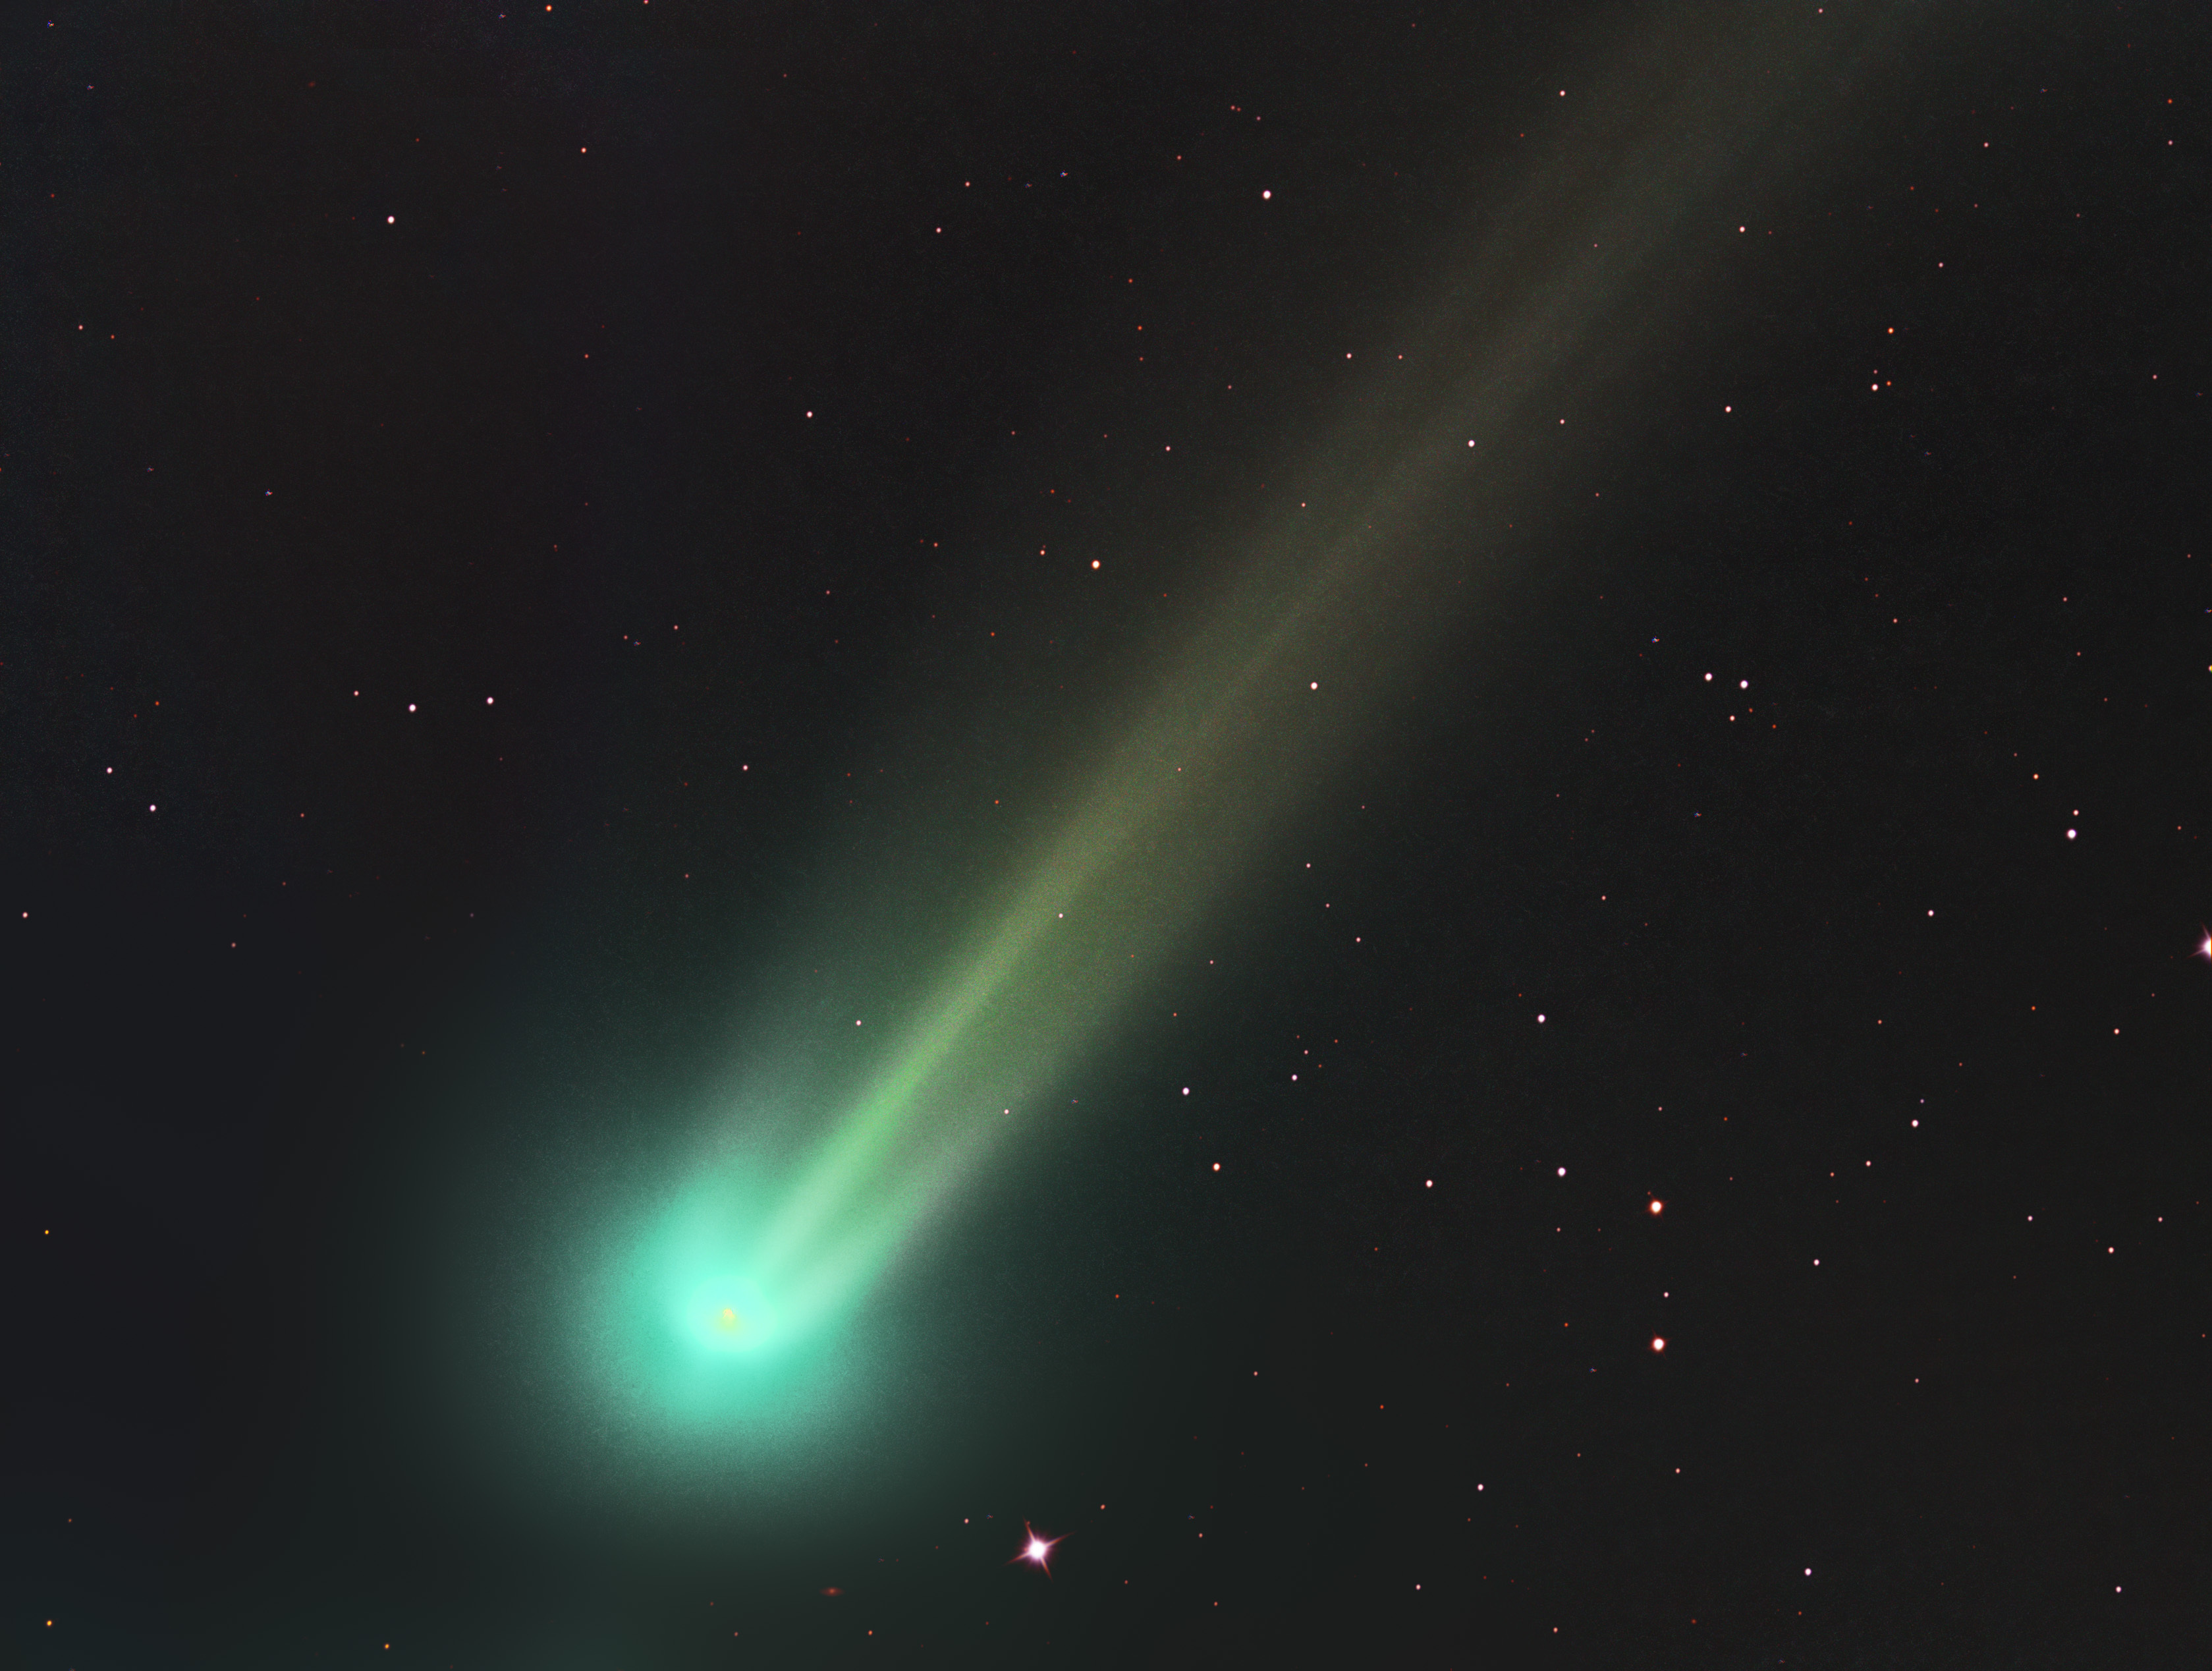 Comet Lovejoy will be in focus Friday night [Jan. 16] at MSU's Howell Observatory on the South Farm.